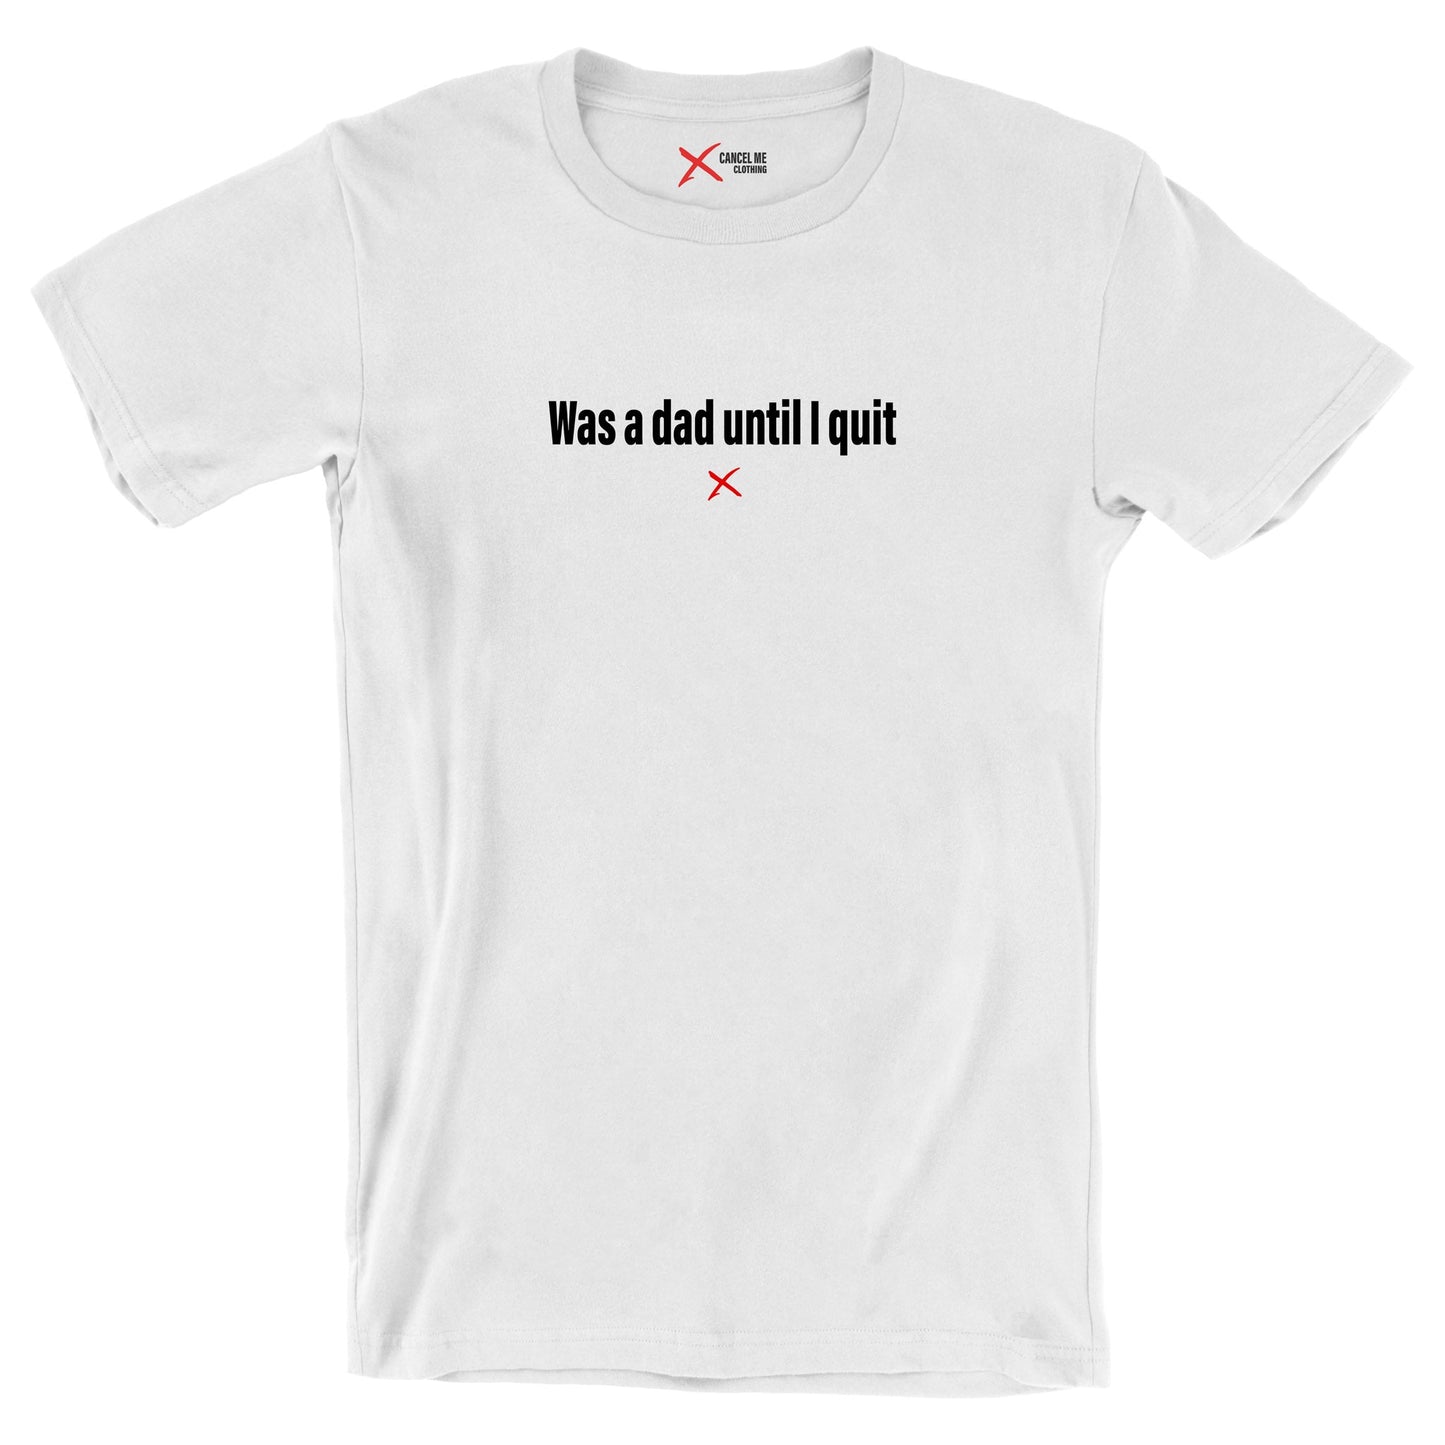 Was a dad until I quit - Shirt